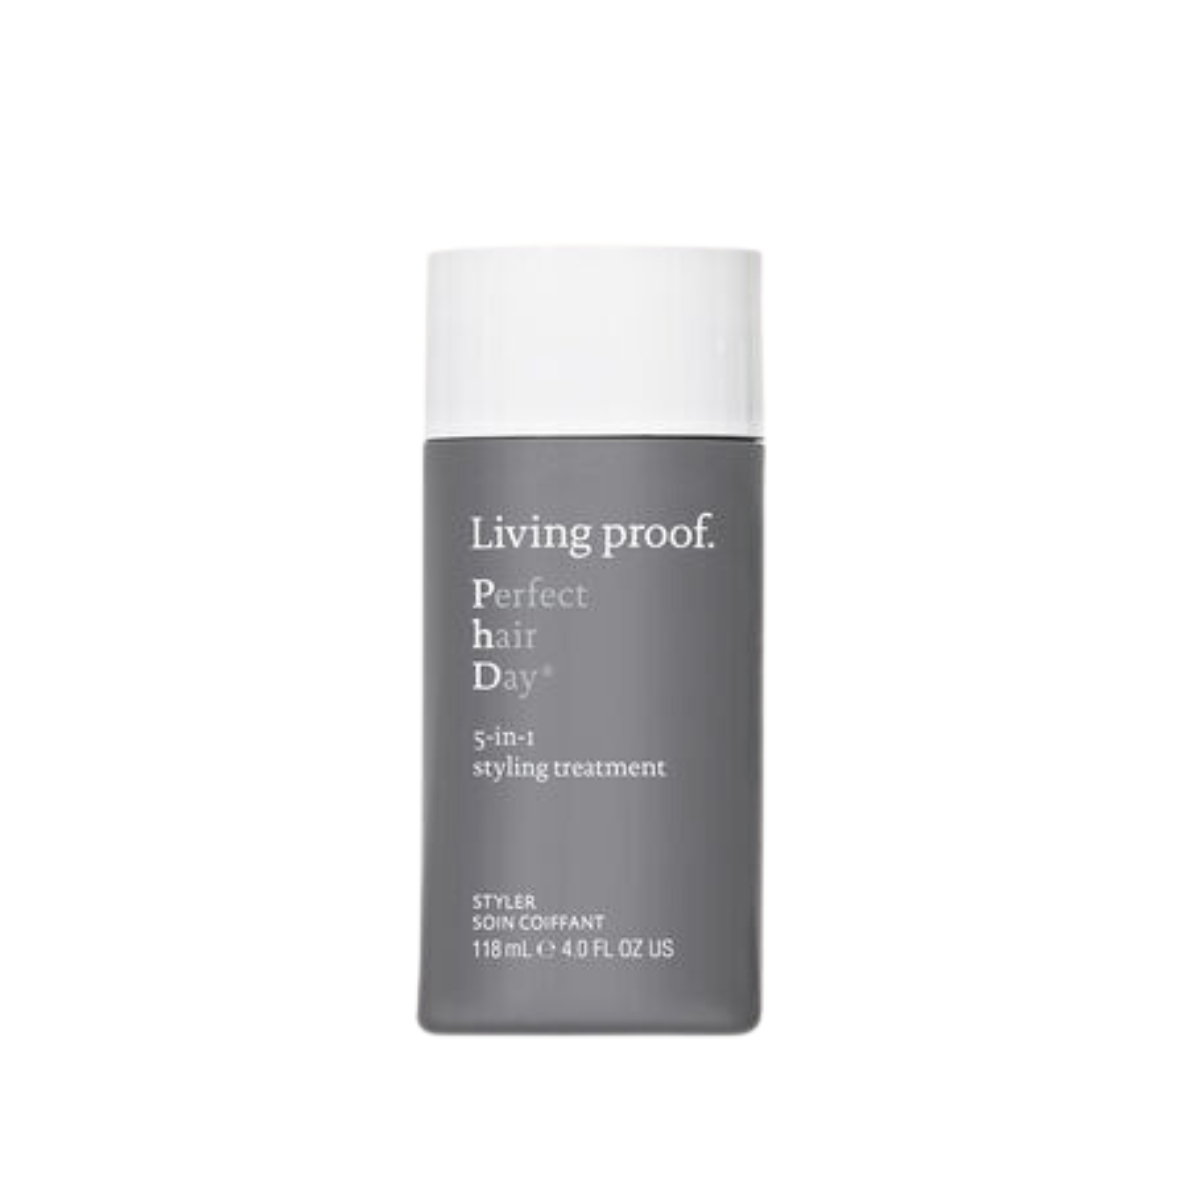 Living Proof Perfect Hair Day 5-in-1 118ml